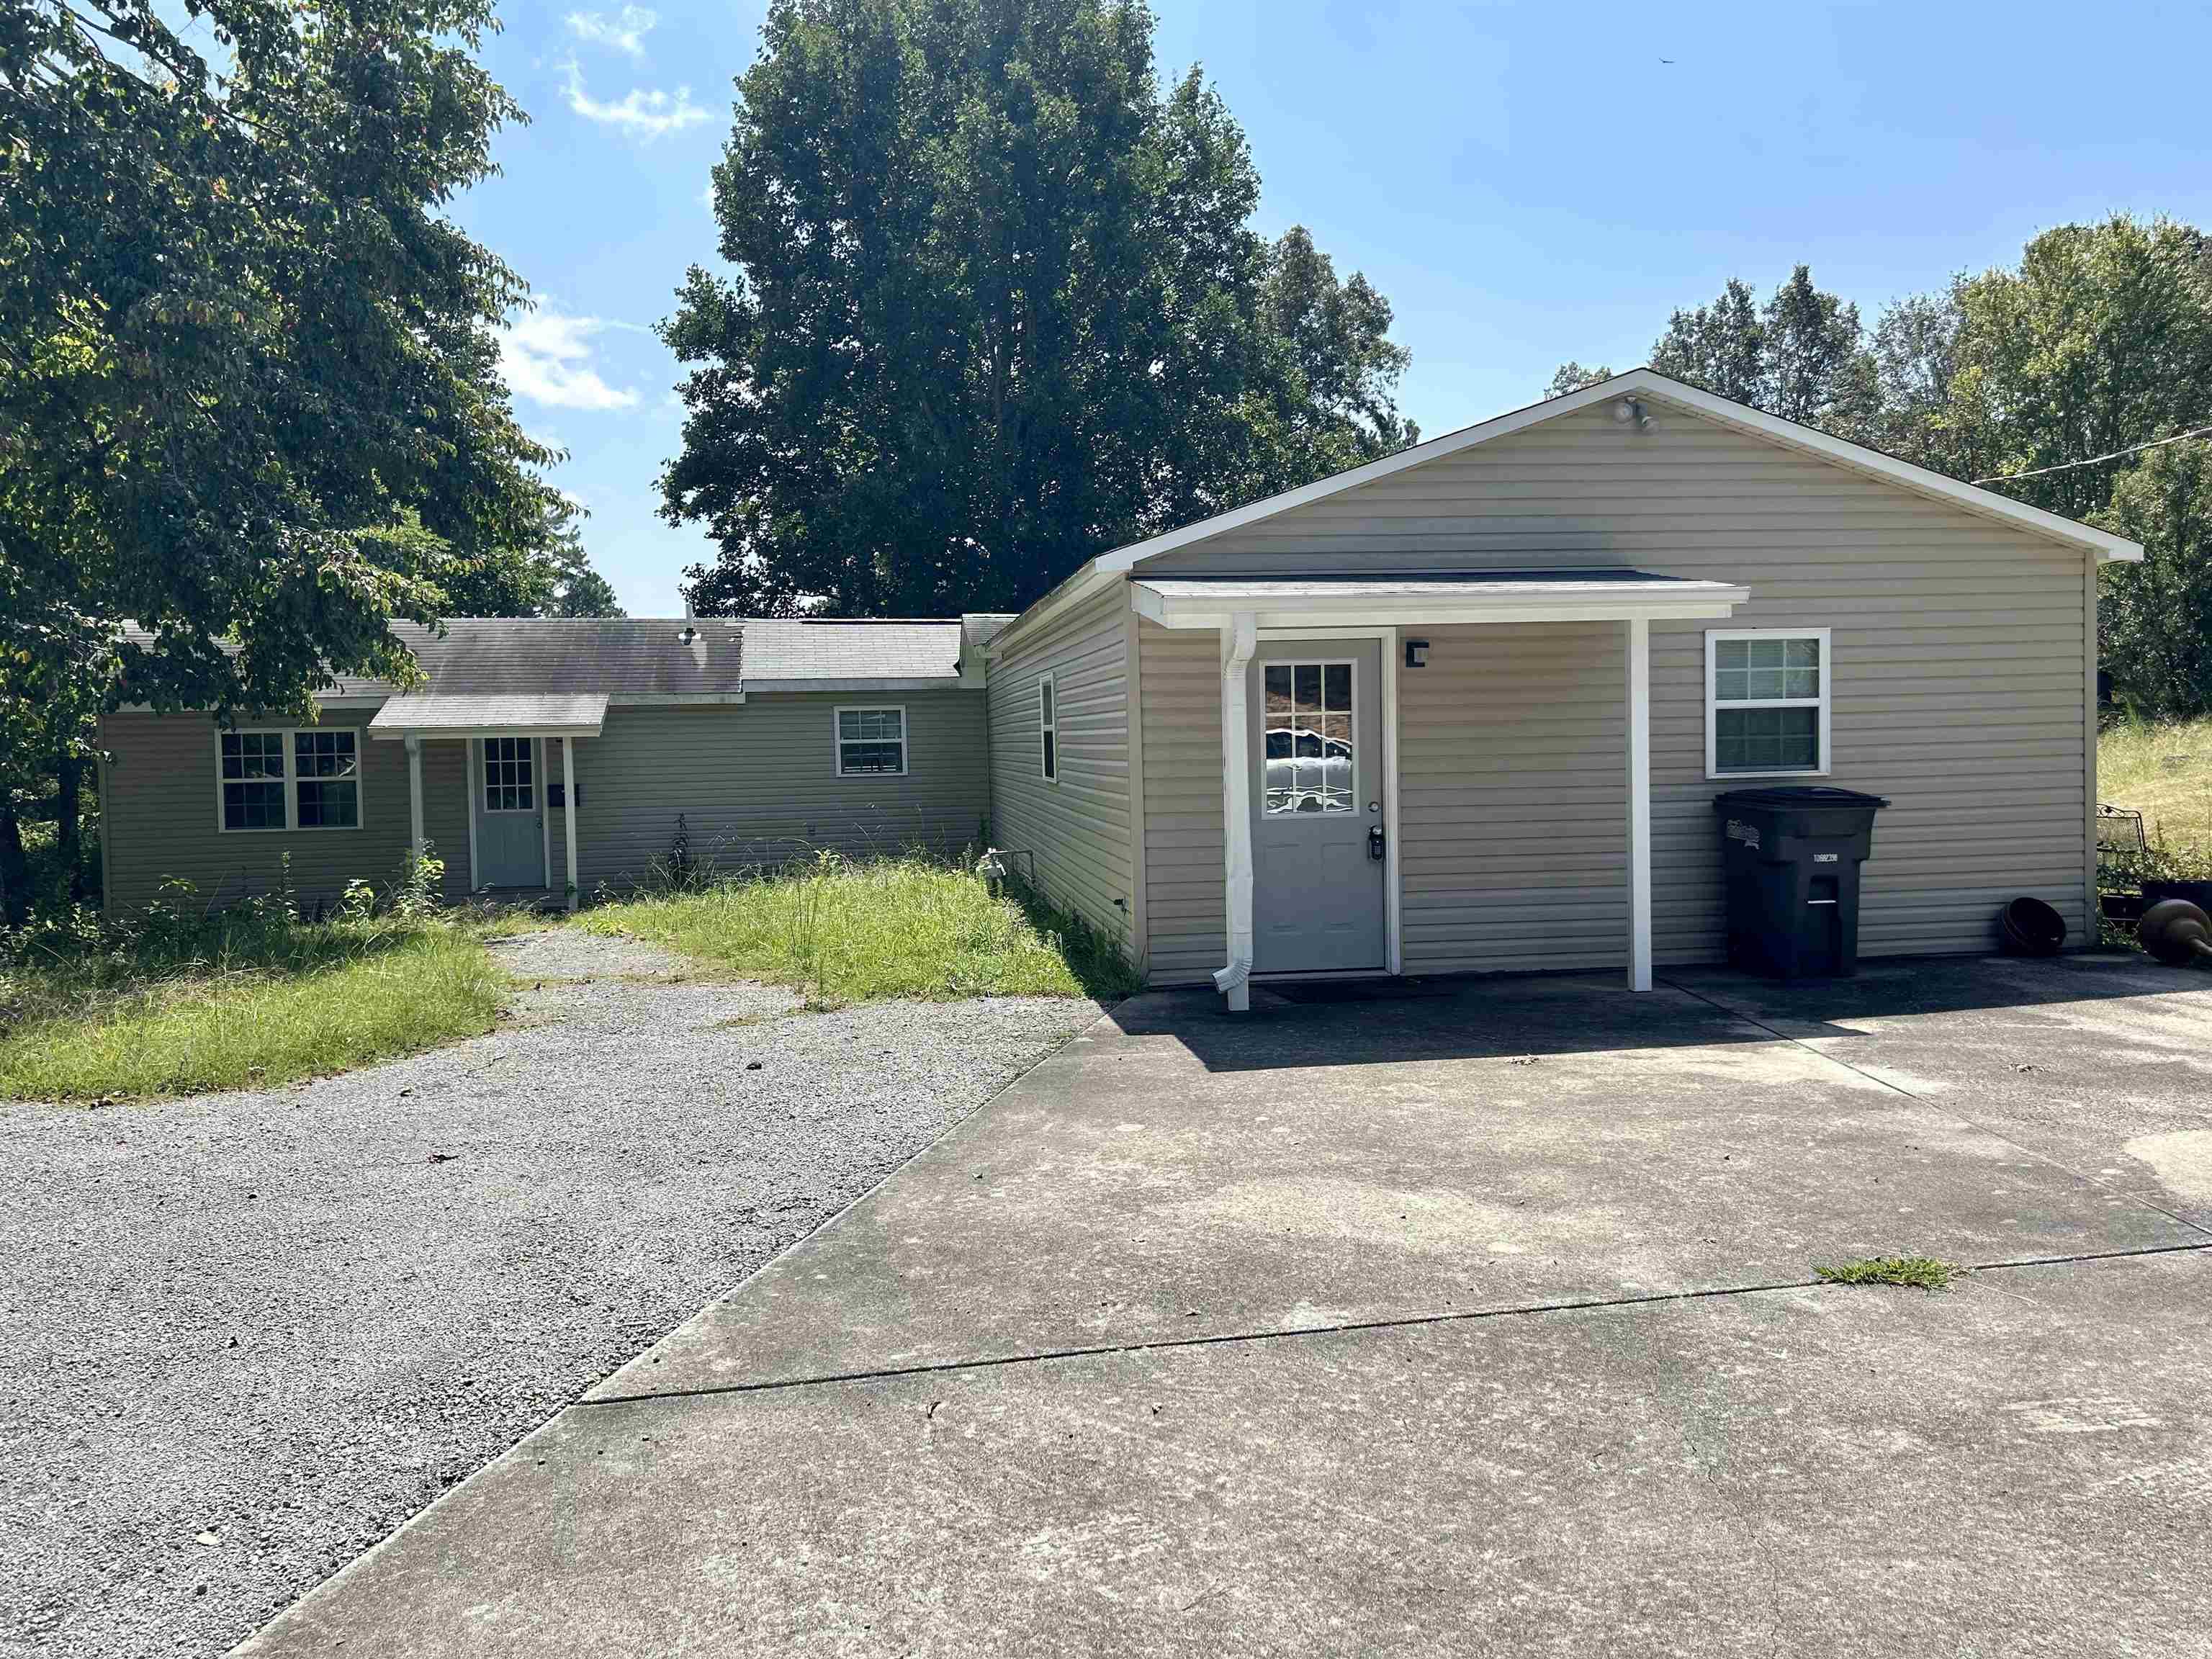 If you are looking for a home two blocks from Russellville City Schools or a local office, this is it! Seller used the home as an office.  Features two half baths with a perfect closet area to add a shower/bath and laundry.  Seller put up walls to create four offices that can become three bedrooms including a good size primary bedroom.  There is a large living and dining area.  Call to schedule your private showing and discover the possibiliies.  House sold as is!